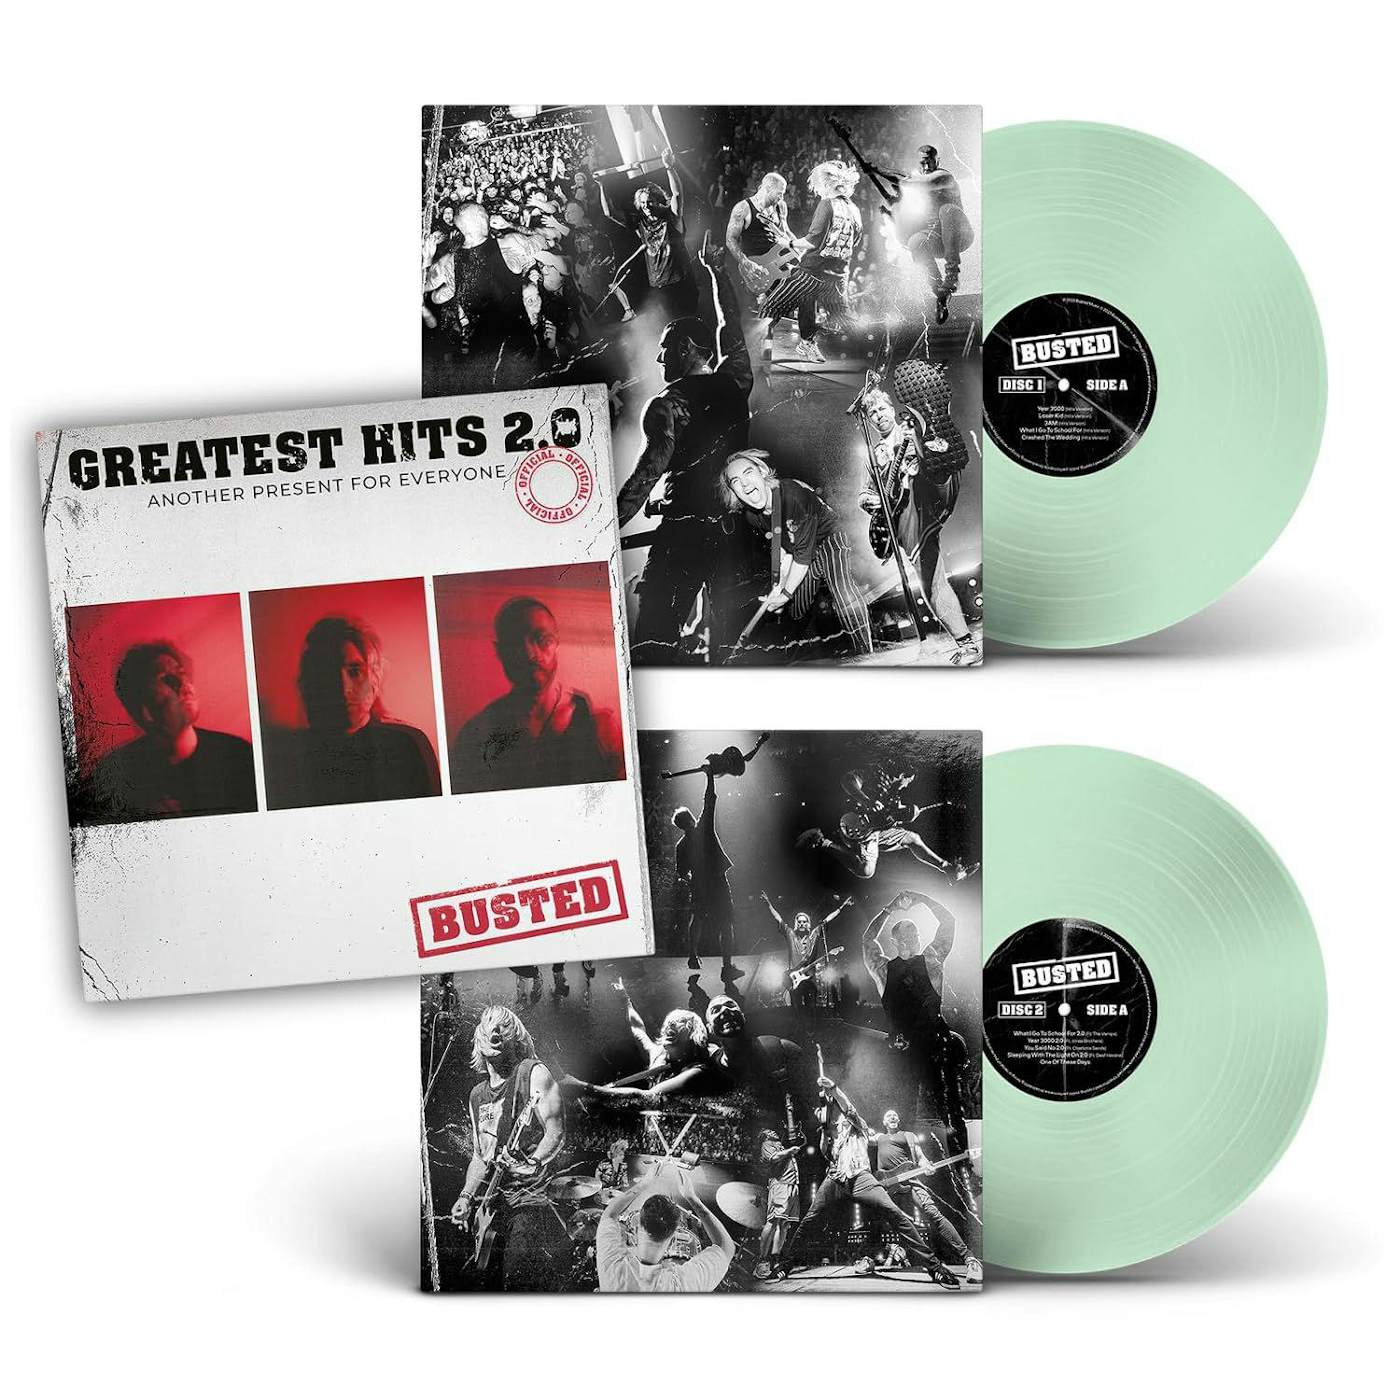 Busted Greatest Hits 2.0 (Another Present For Everyone) Vinyl Record